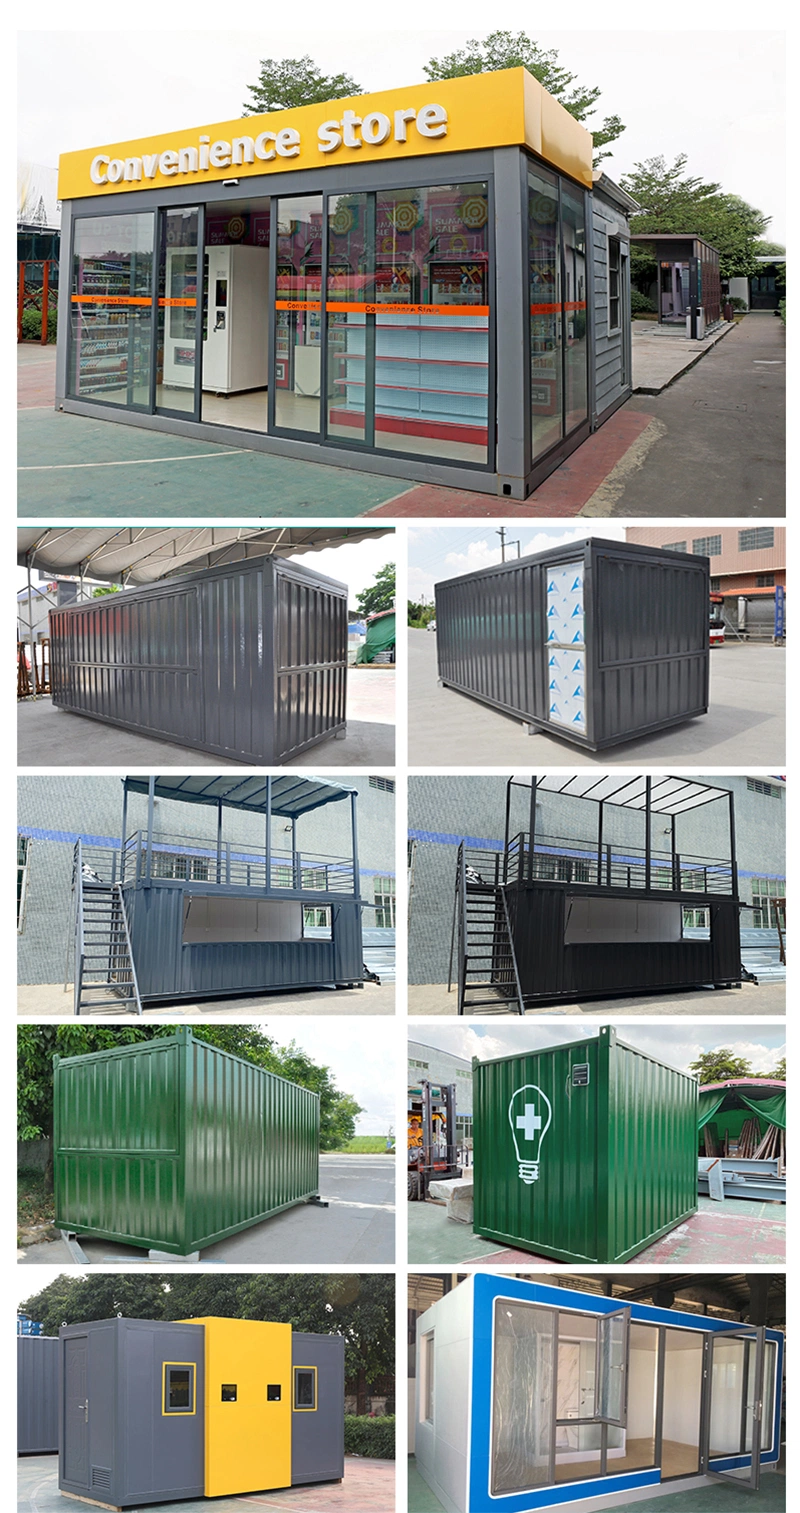 40FT Special Shiping Container Bar Customized Equipment Shipping Bubble Tea Container Glass Door Container Bar Cafe Shop